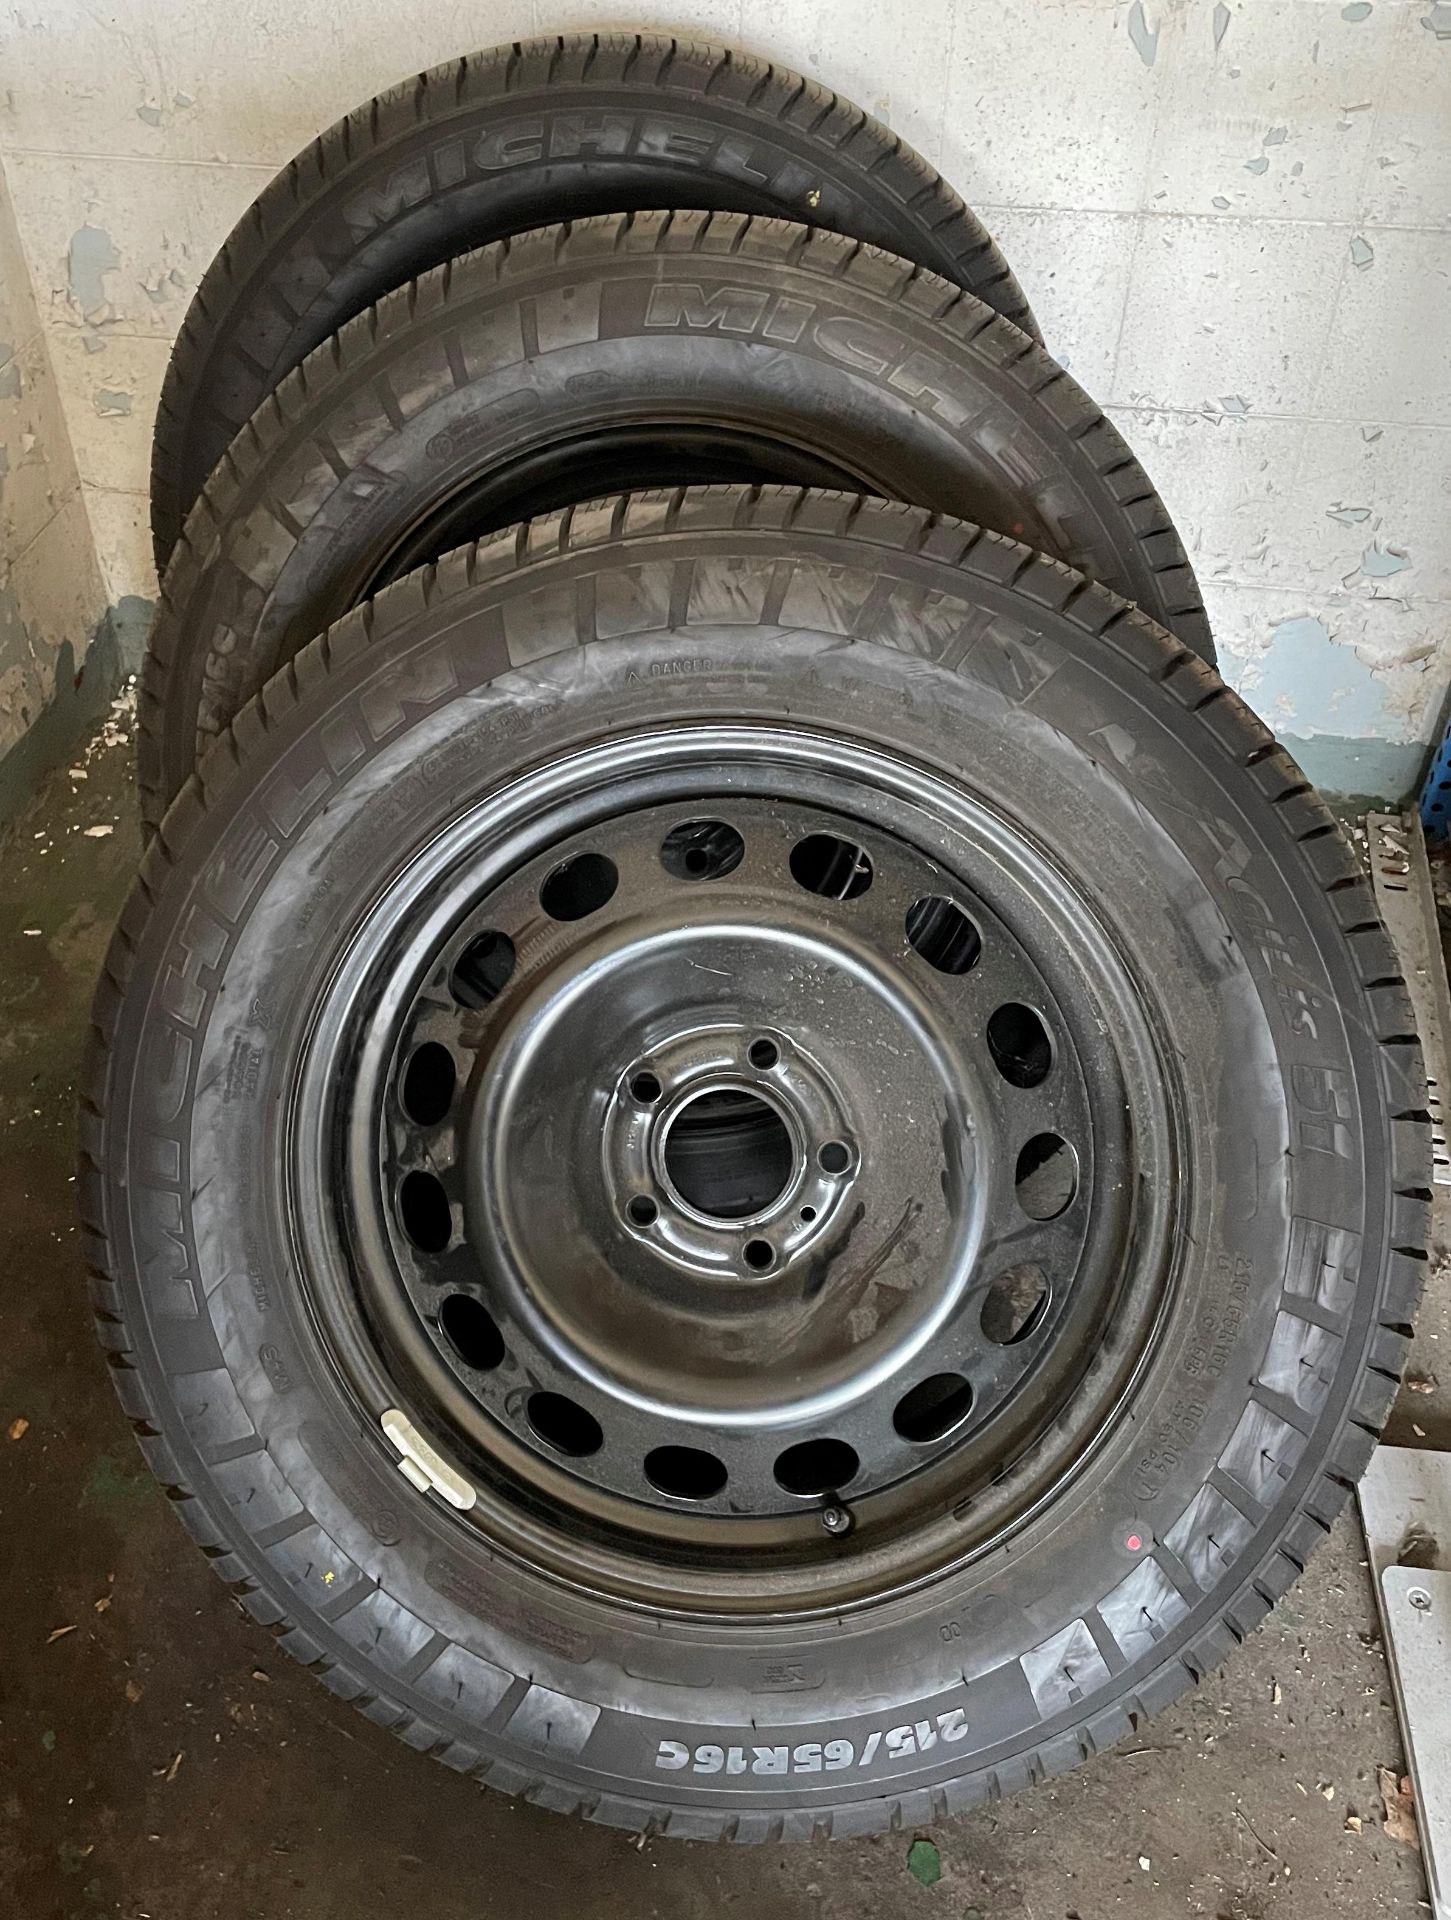 Set of three five stud black metal wheels with Michelin Agilis 51 215/65R16C tyres (possibly